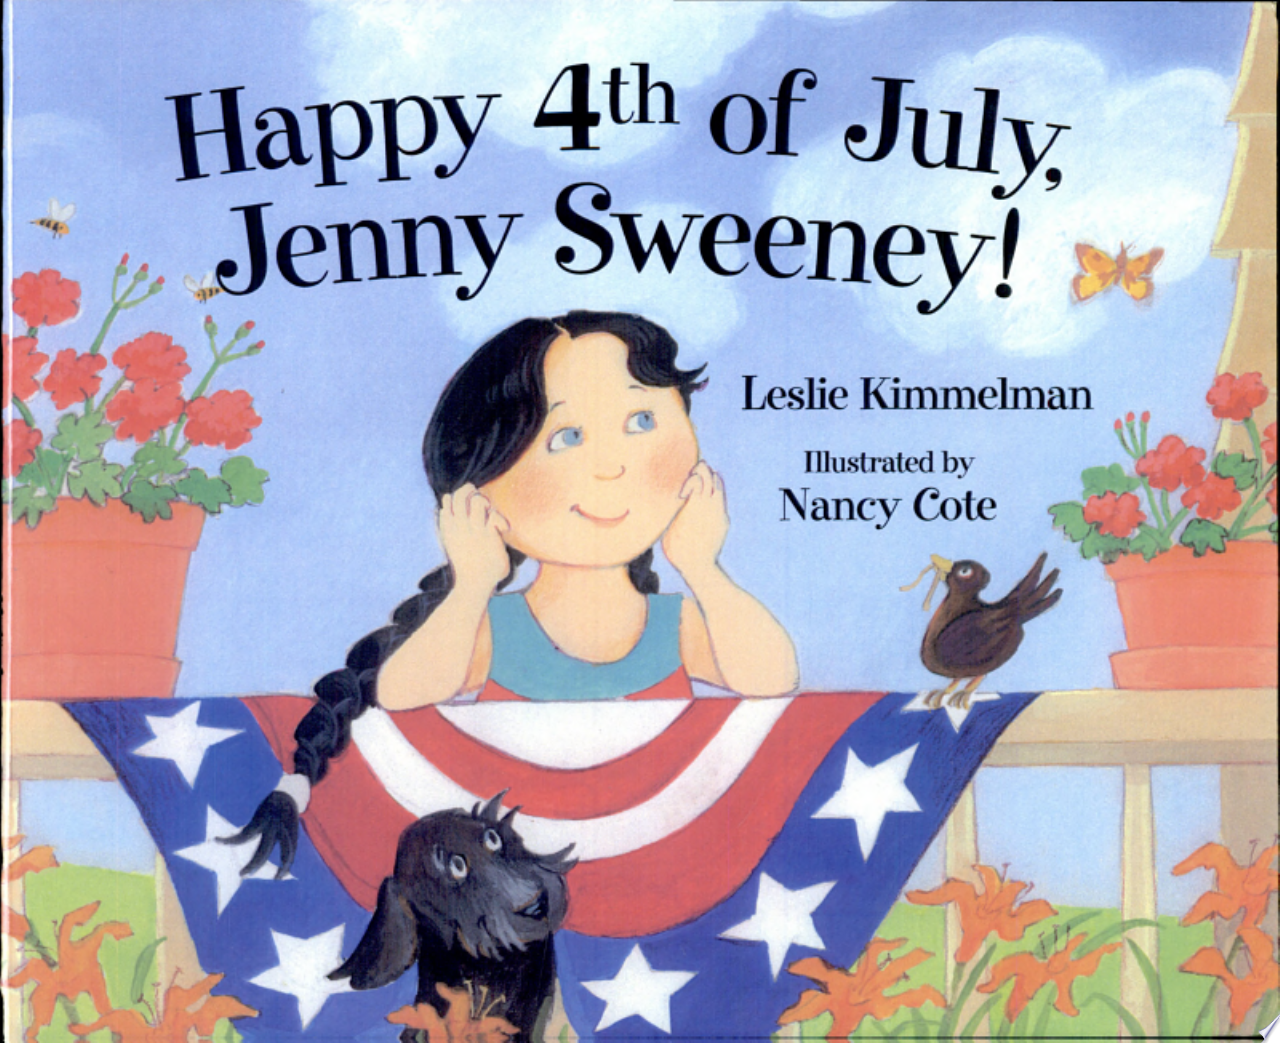 Image for "Happy 4th of July, Jenny Sweeney!"